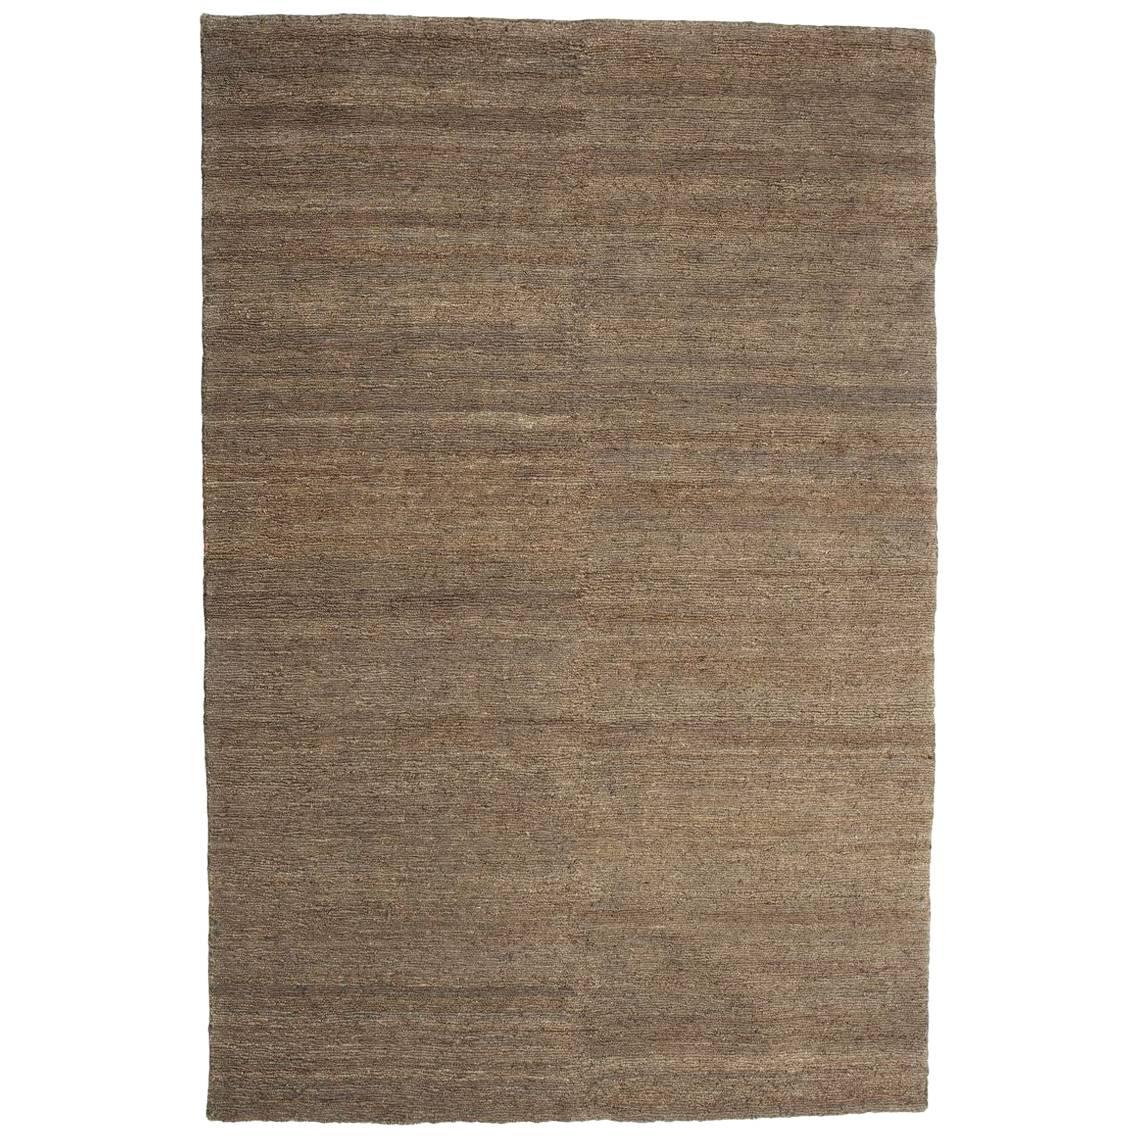 Khaki Earth Rug in Hand-Knotted Jute by Nani Marquina & Ariadna Miquel, Medium